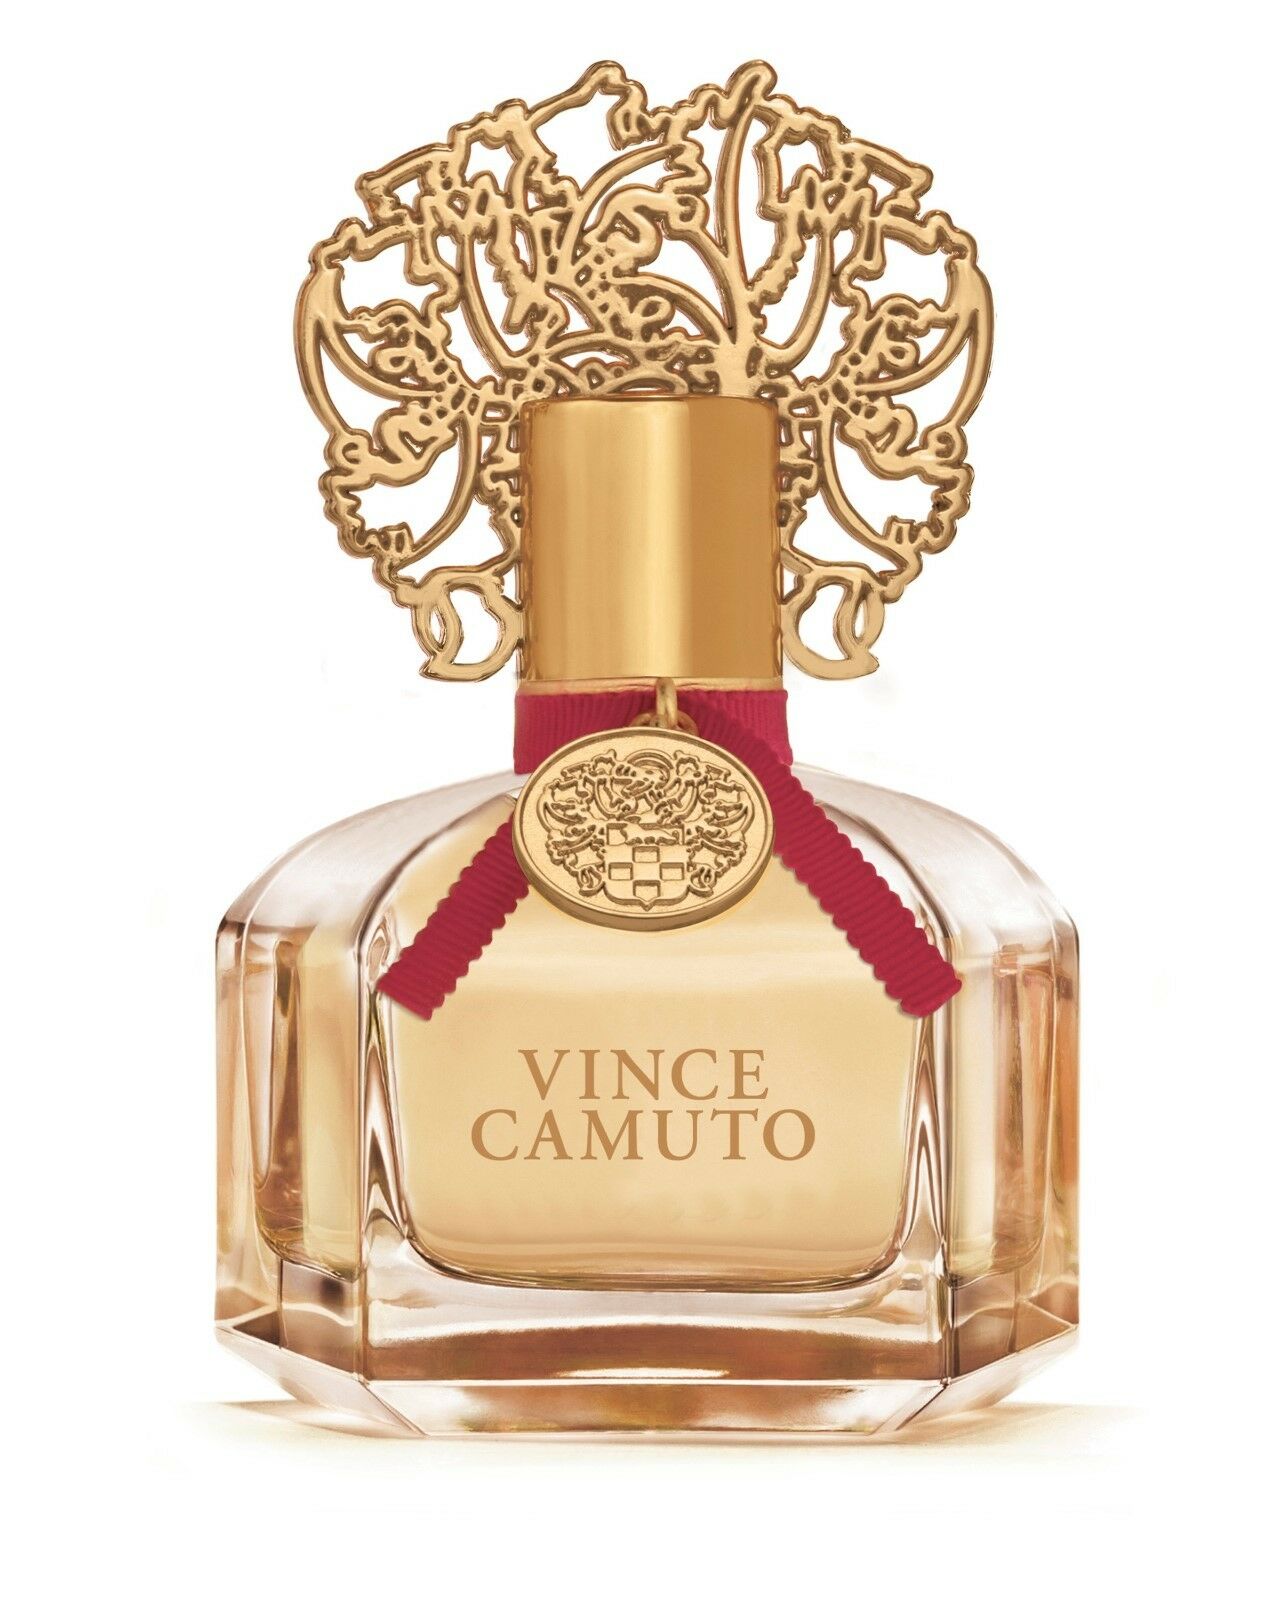 VINCE CAMUTO WOMAN